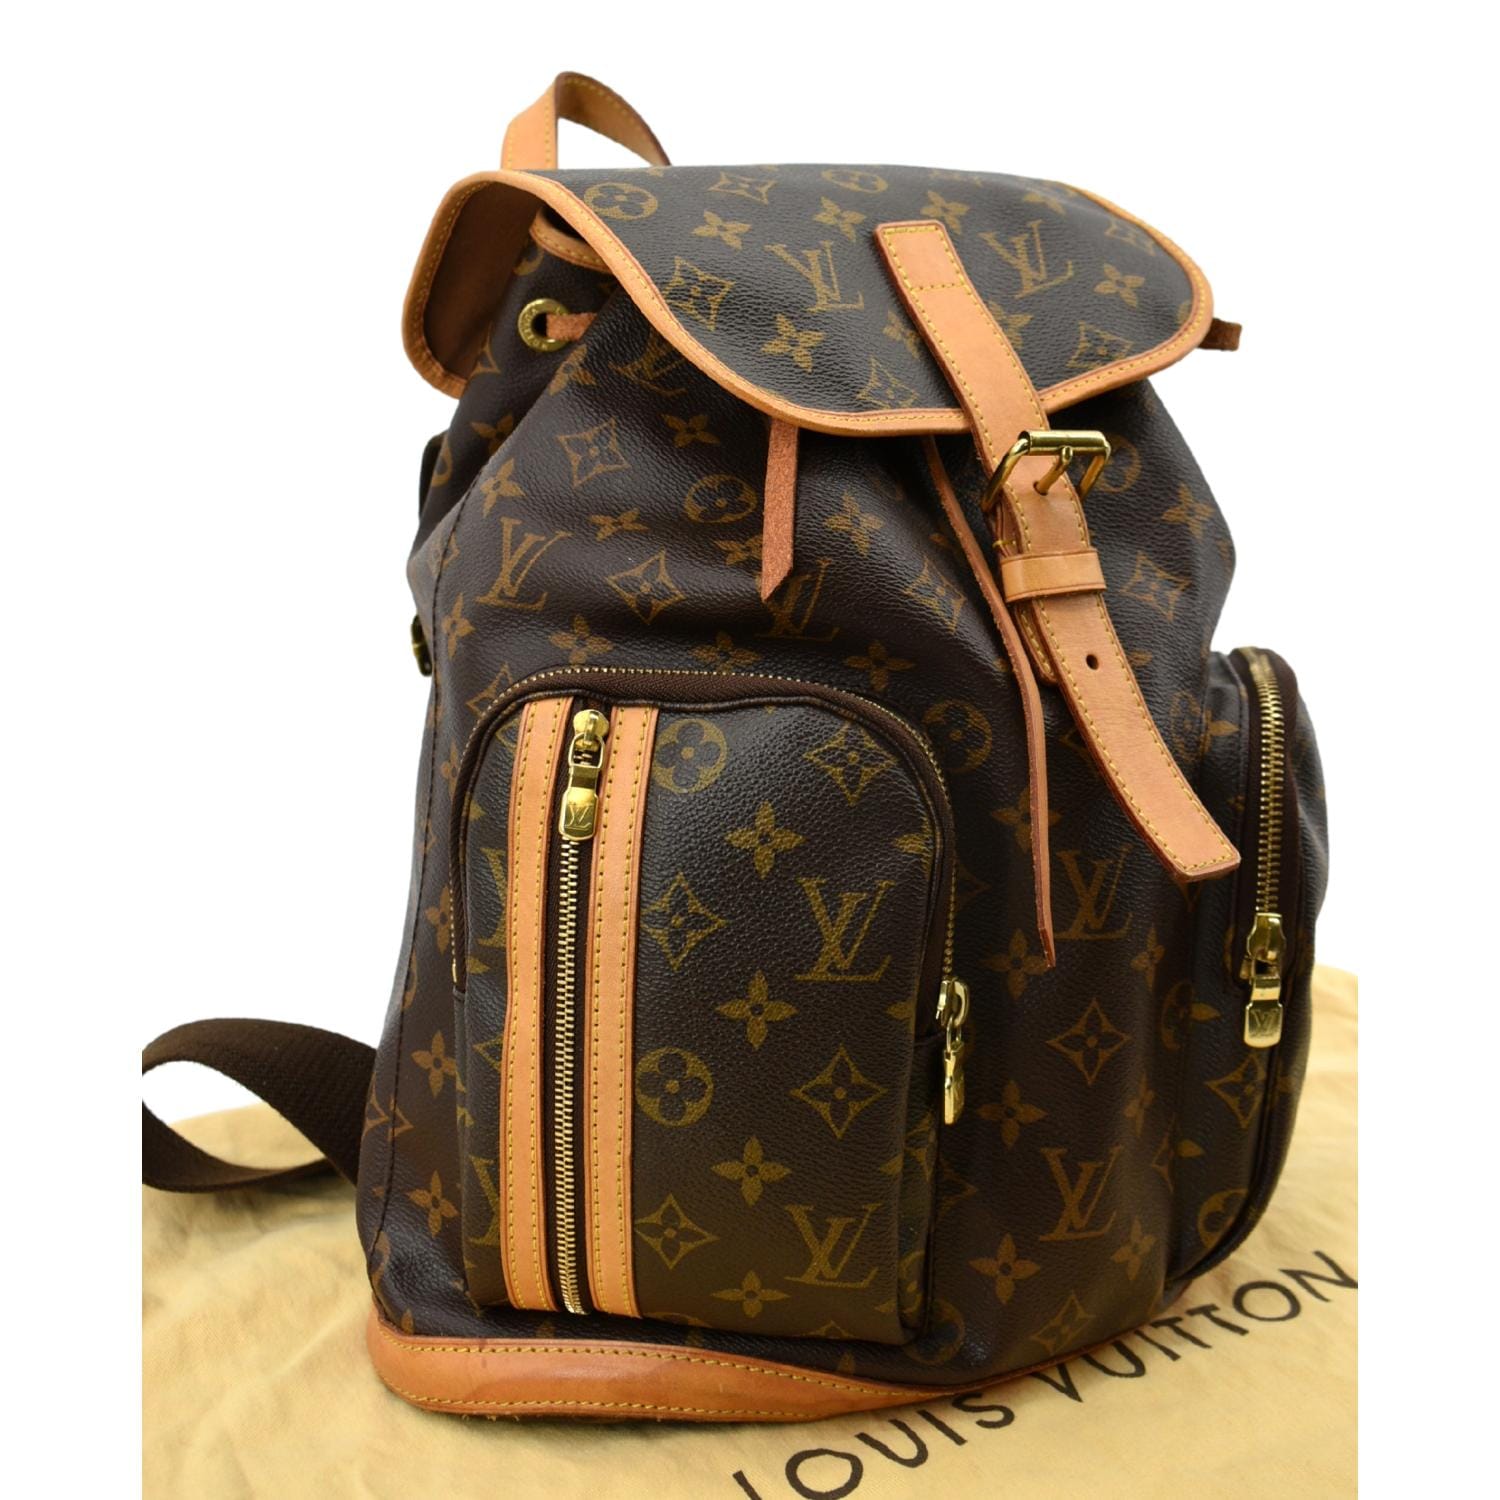 Bosphore Backpack  Bags, Louis vuitton backpack, Vuitton